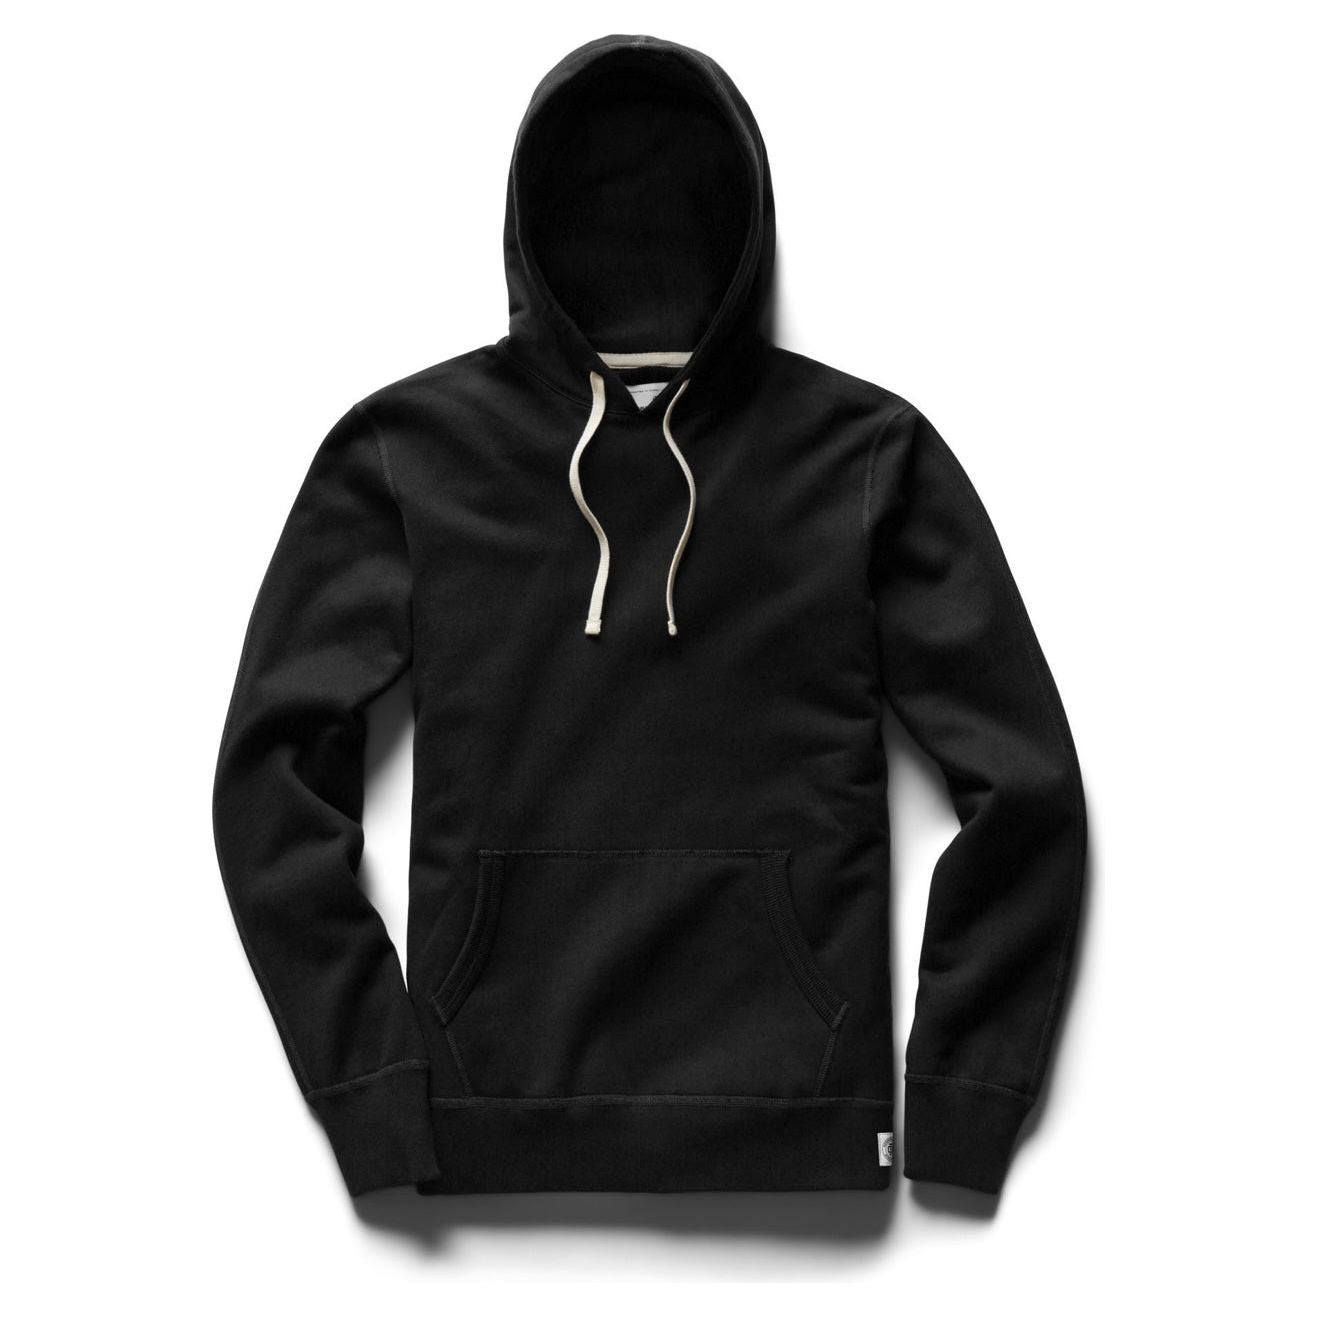 REIGNING CHAMP midweight core hood